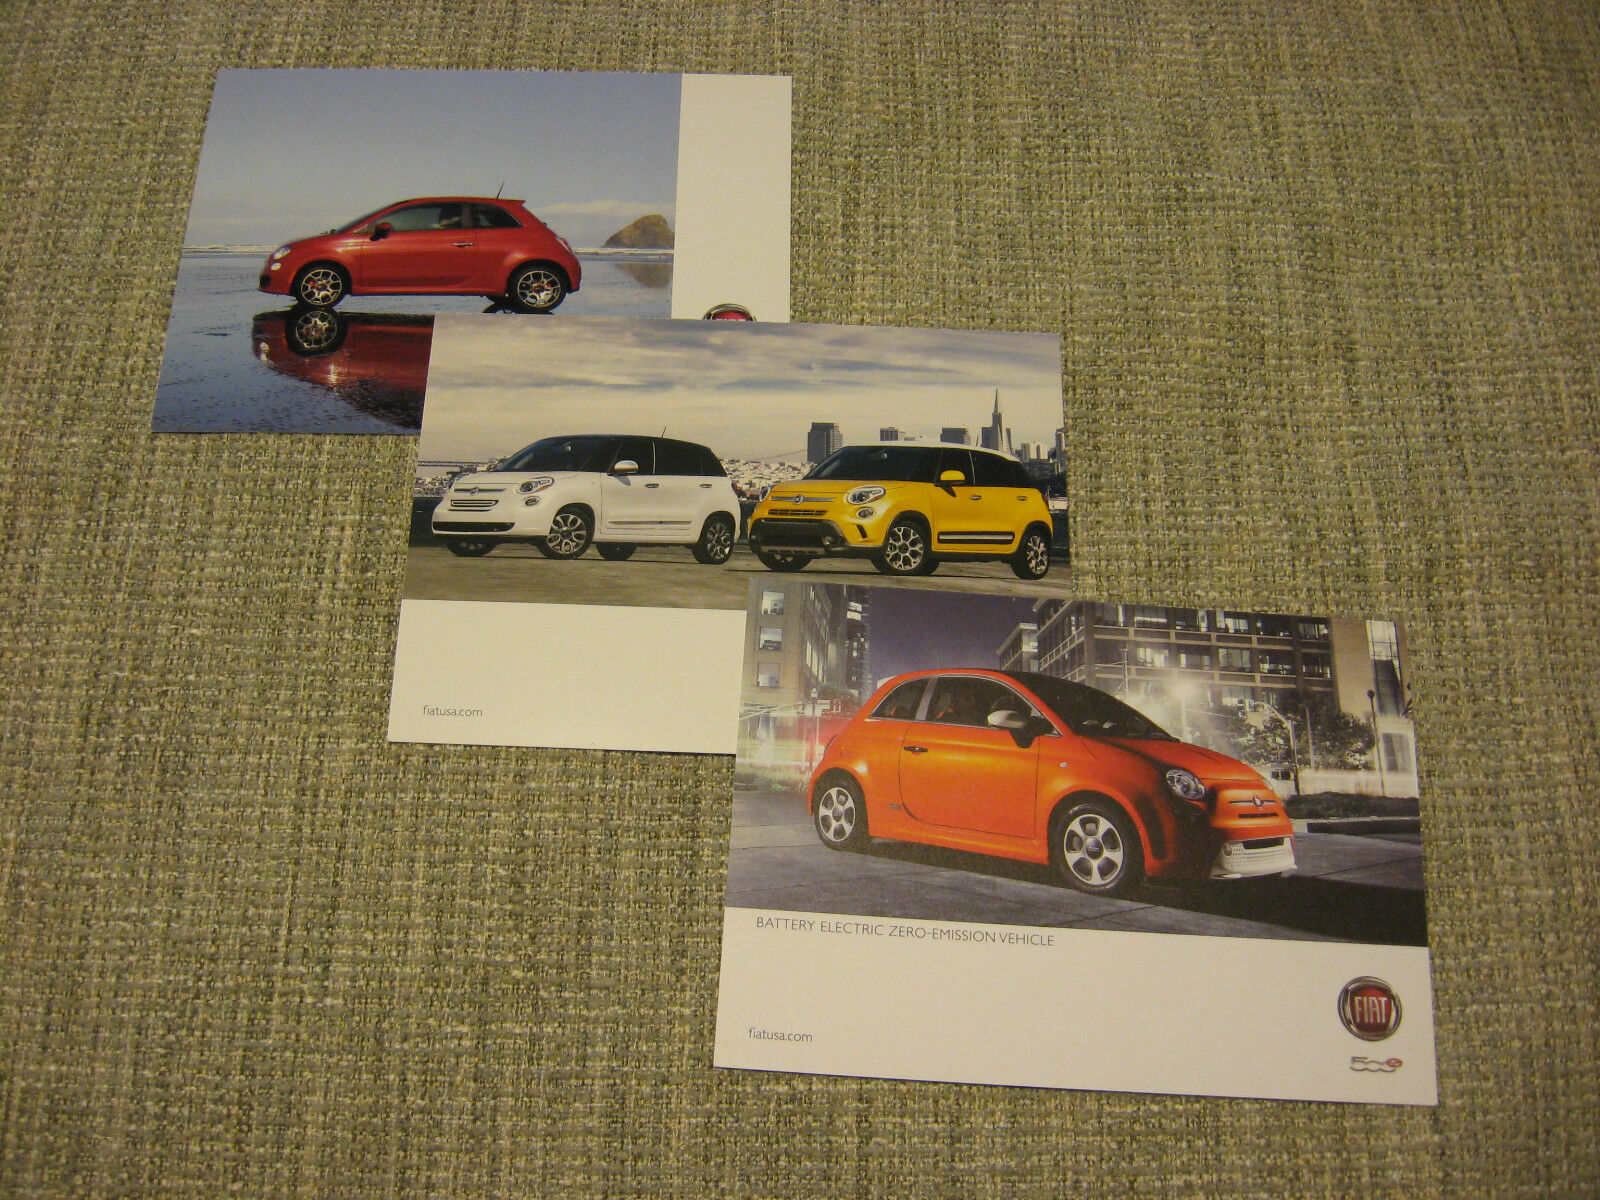 2013 Fiat - Double sided Brochure Cards - Set of 3